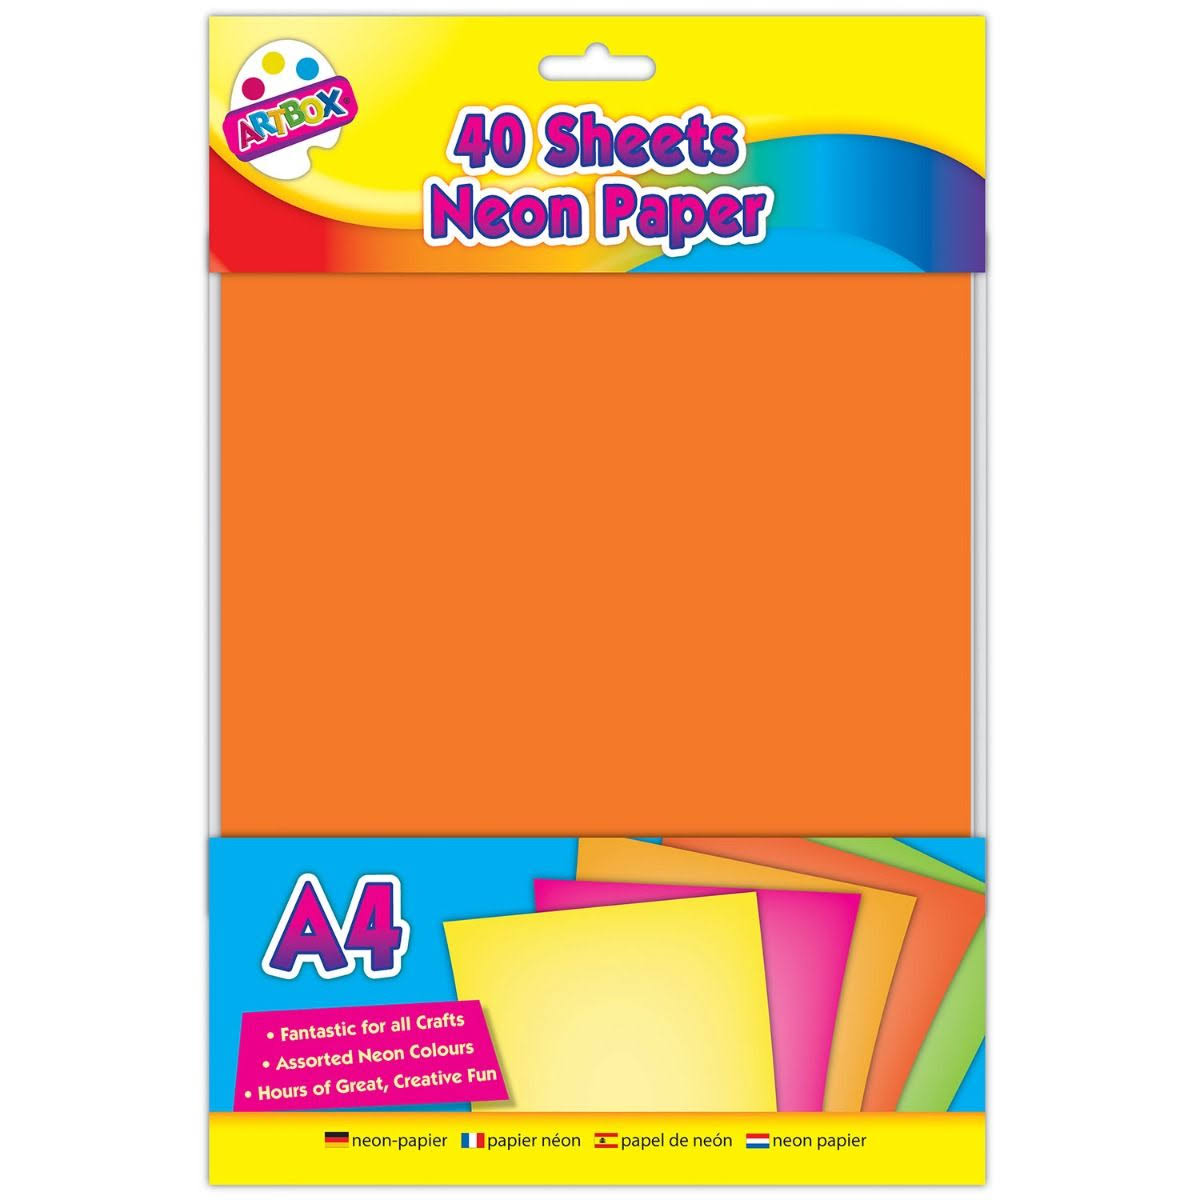 A4 Neon Craft Paper 40 Sheets